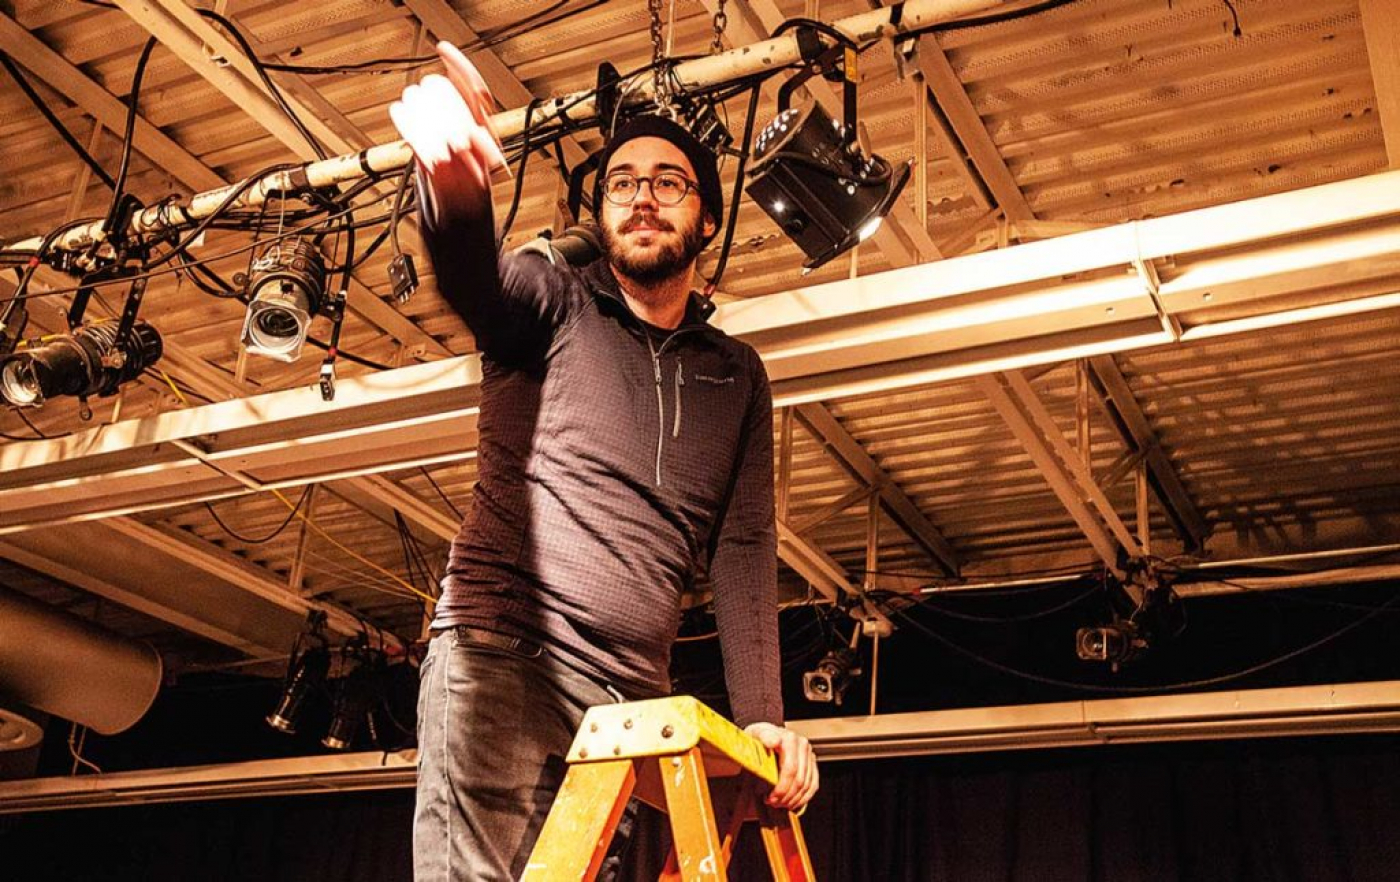 Mark helps hang lights during technical rehearsal for Dear Elizabeth by Sarah Ruhl - his first production with Stage East and just before the pandemic (photo: Leslie Bowman)